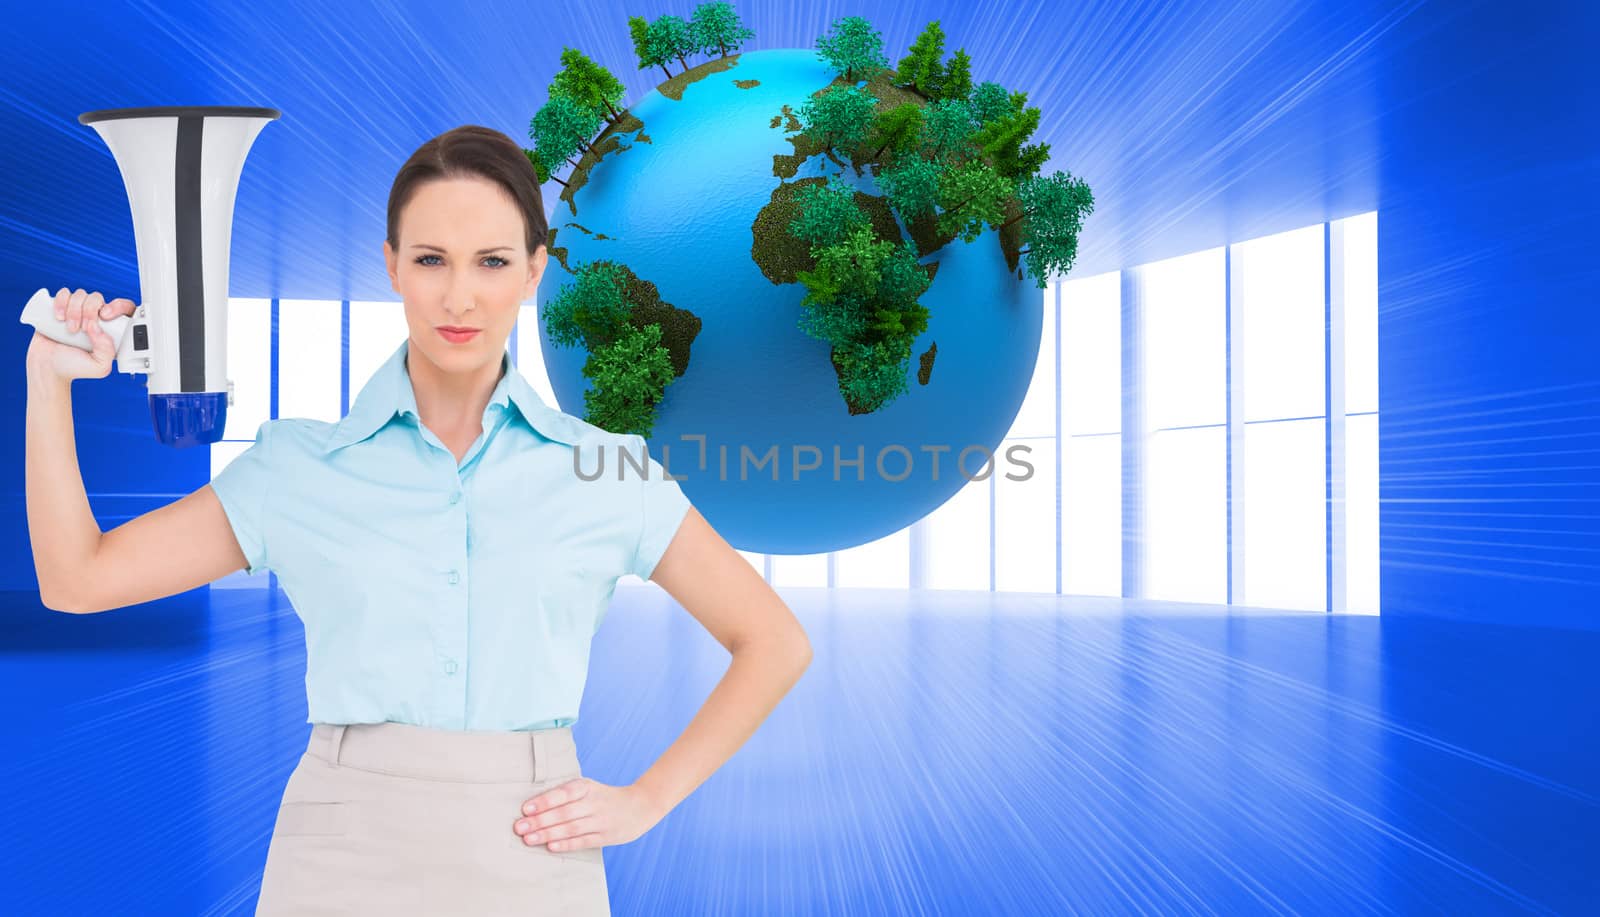 Composite image of stern classy businesswoman holding megaphone by Wavebreakmedia